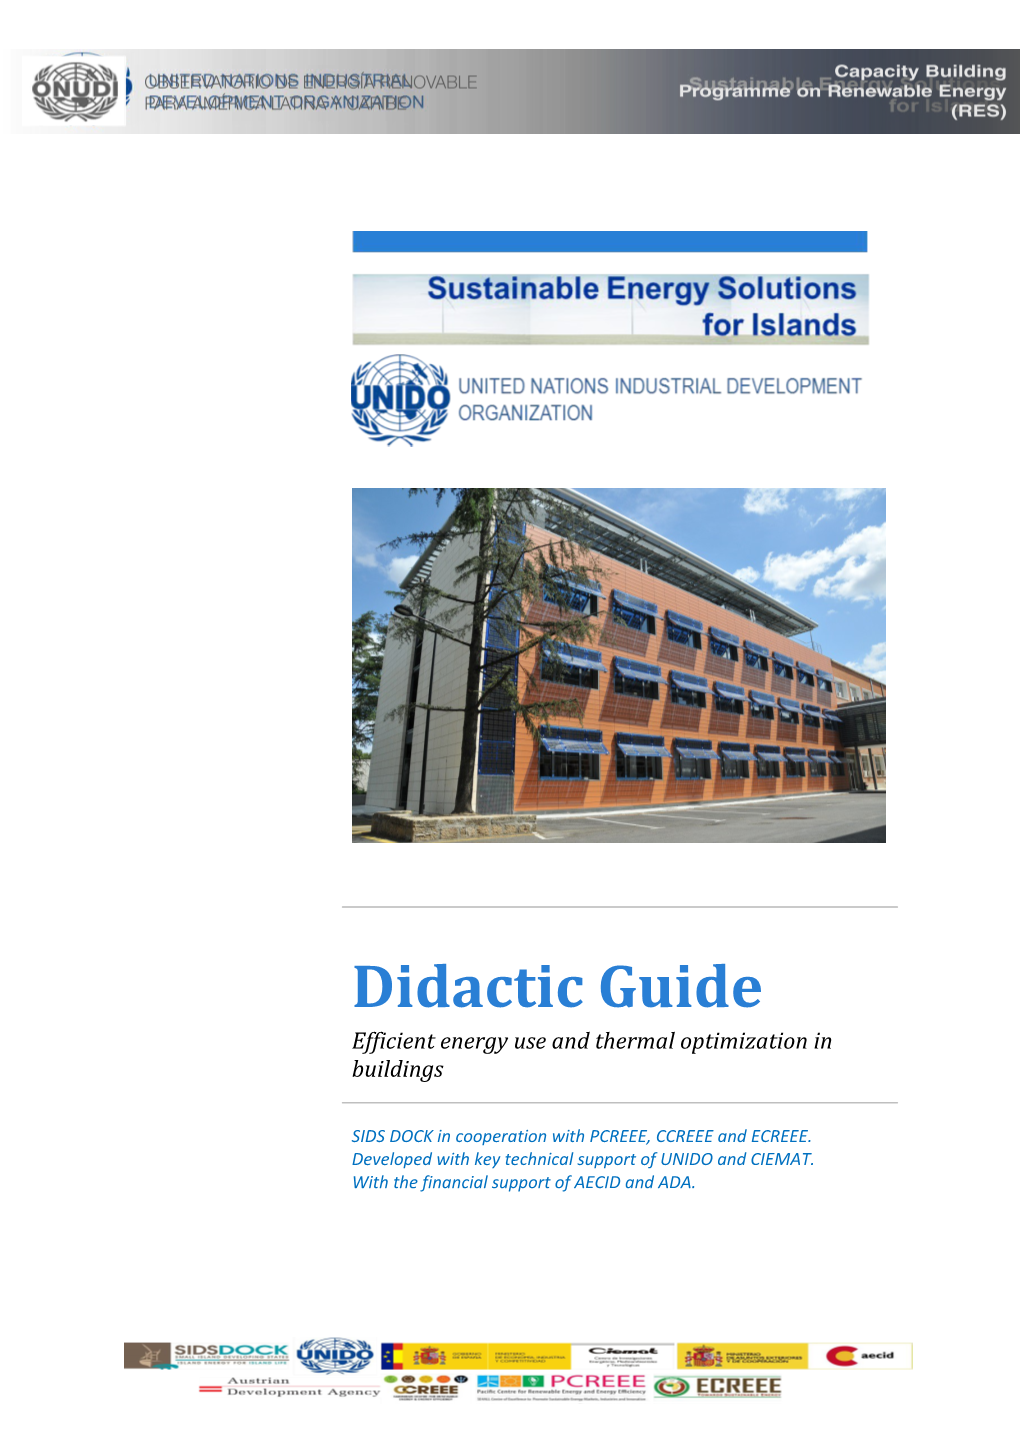 Efficient Energy Use and Thermal Optimization in Buildings